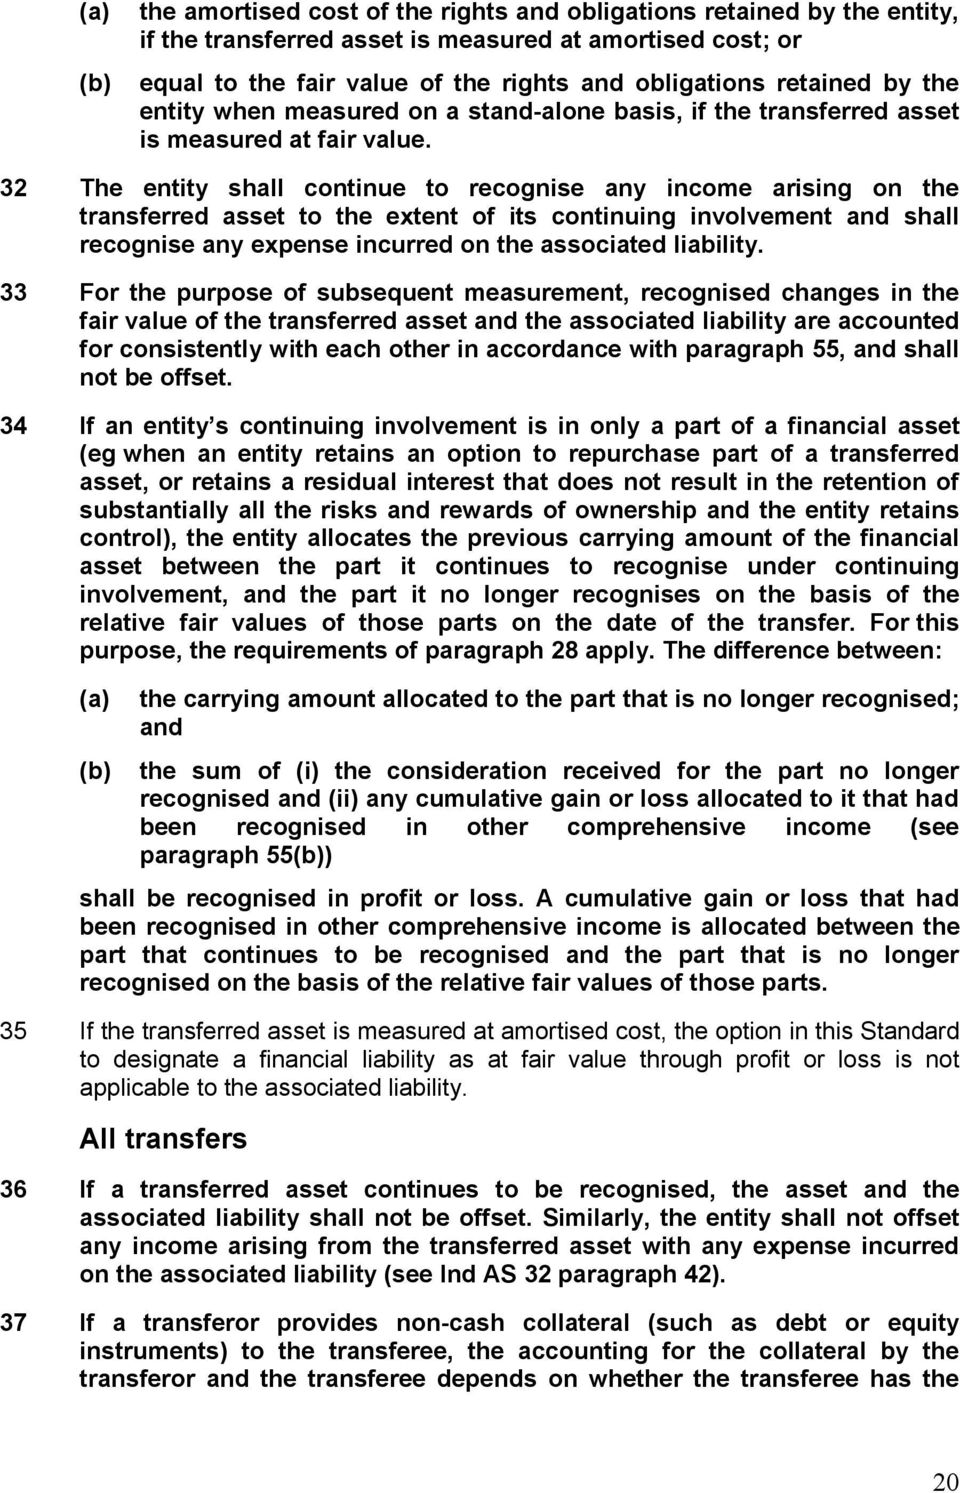 32 The entity shall continue to recognise any income arising on the transferred asset to the extent of its continuing involvement and shall recognise any expense incurred on the associated liability.